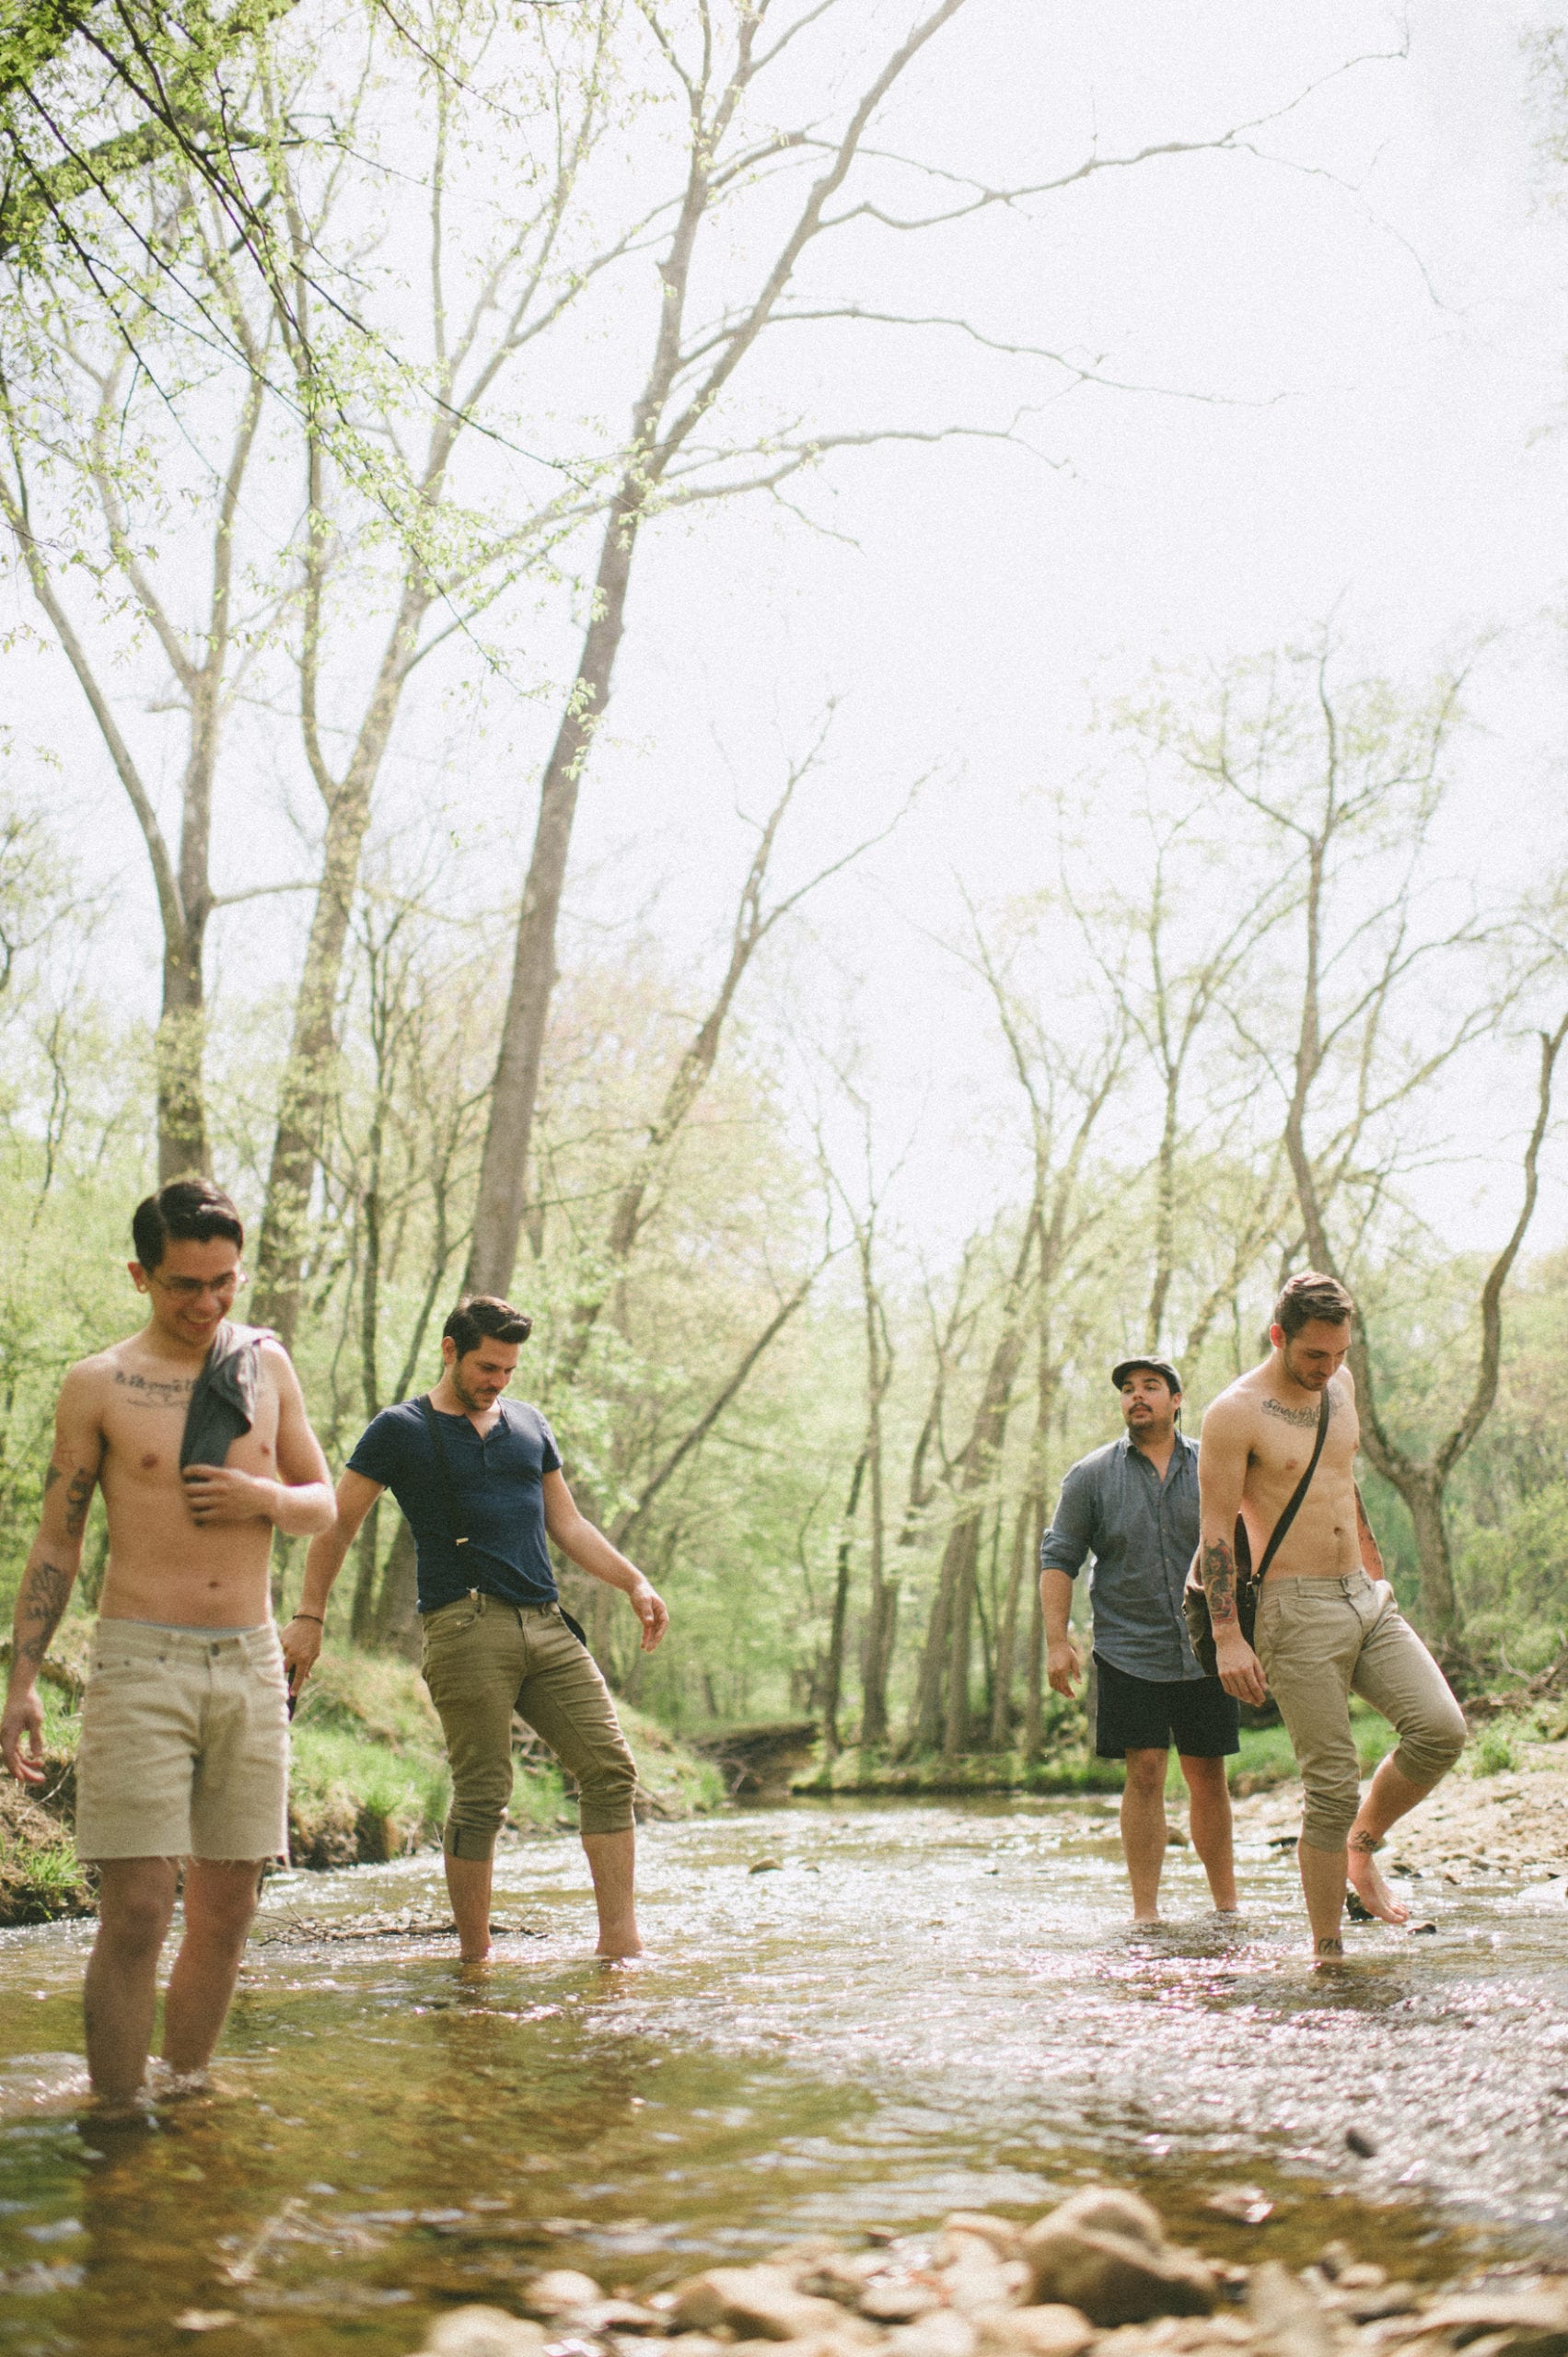 Four males walking in a creek on a sunny day in the forest. Two males are shirtless with tattoos on their arms and chest.